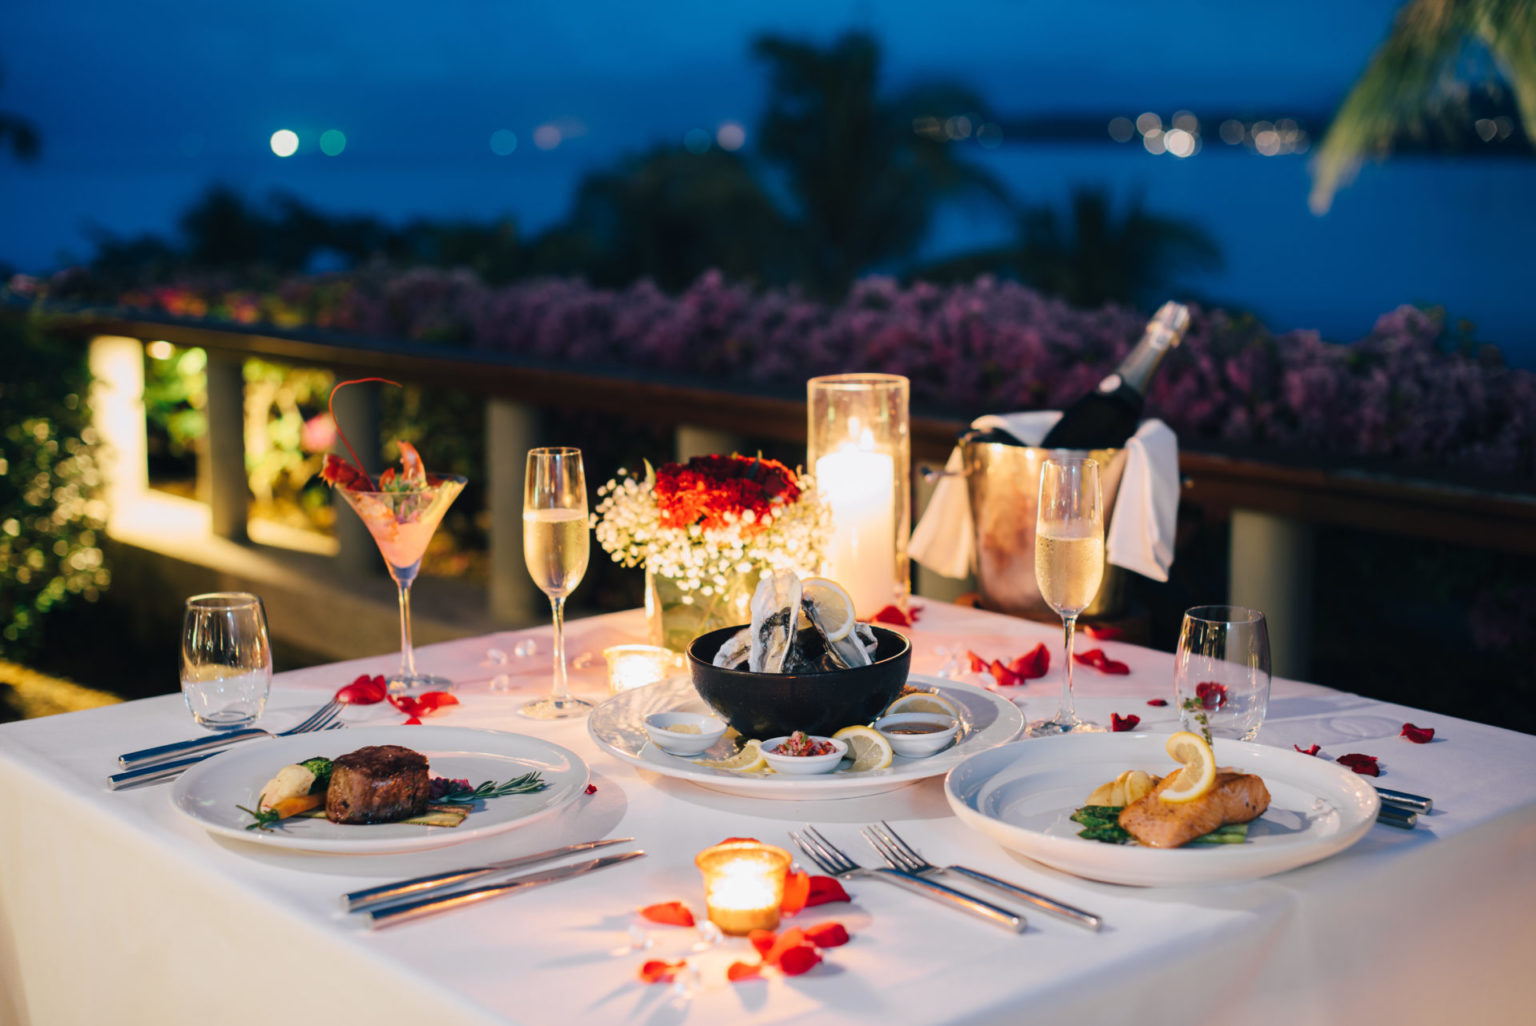 Romantic Candlelight Dinner Table Setup For Valentine's Day With